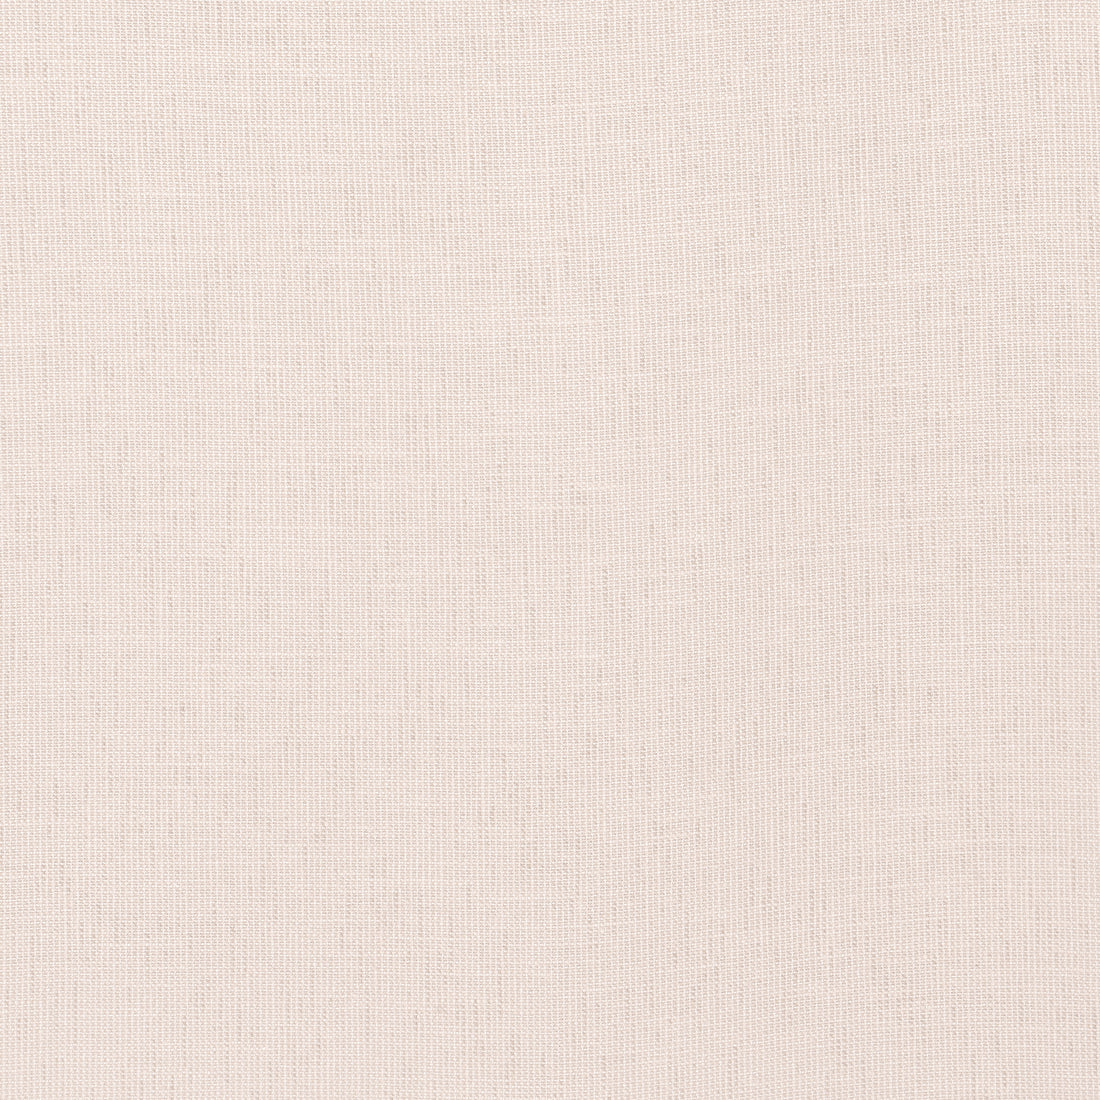 Ottawa fabric in blush color - pattern number FWW8248 - by Thibaut in the Aura collection